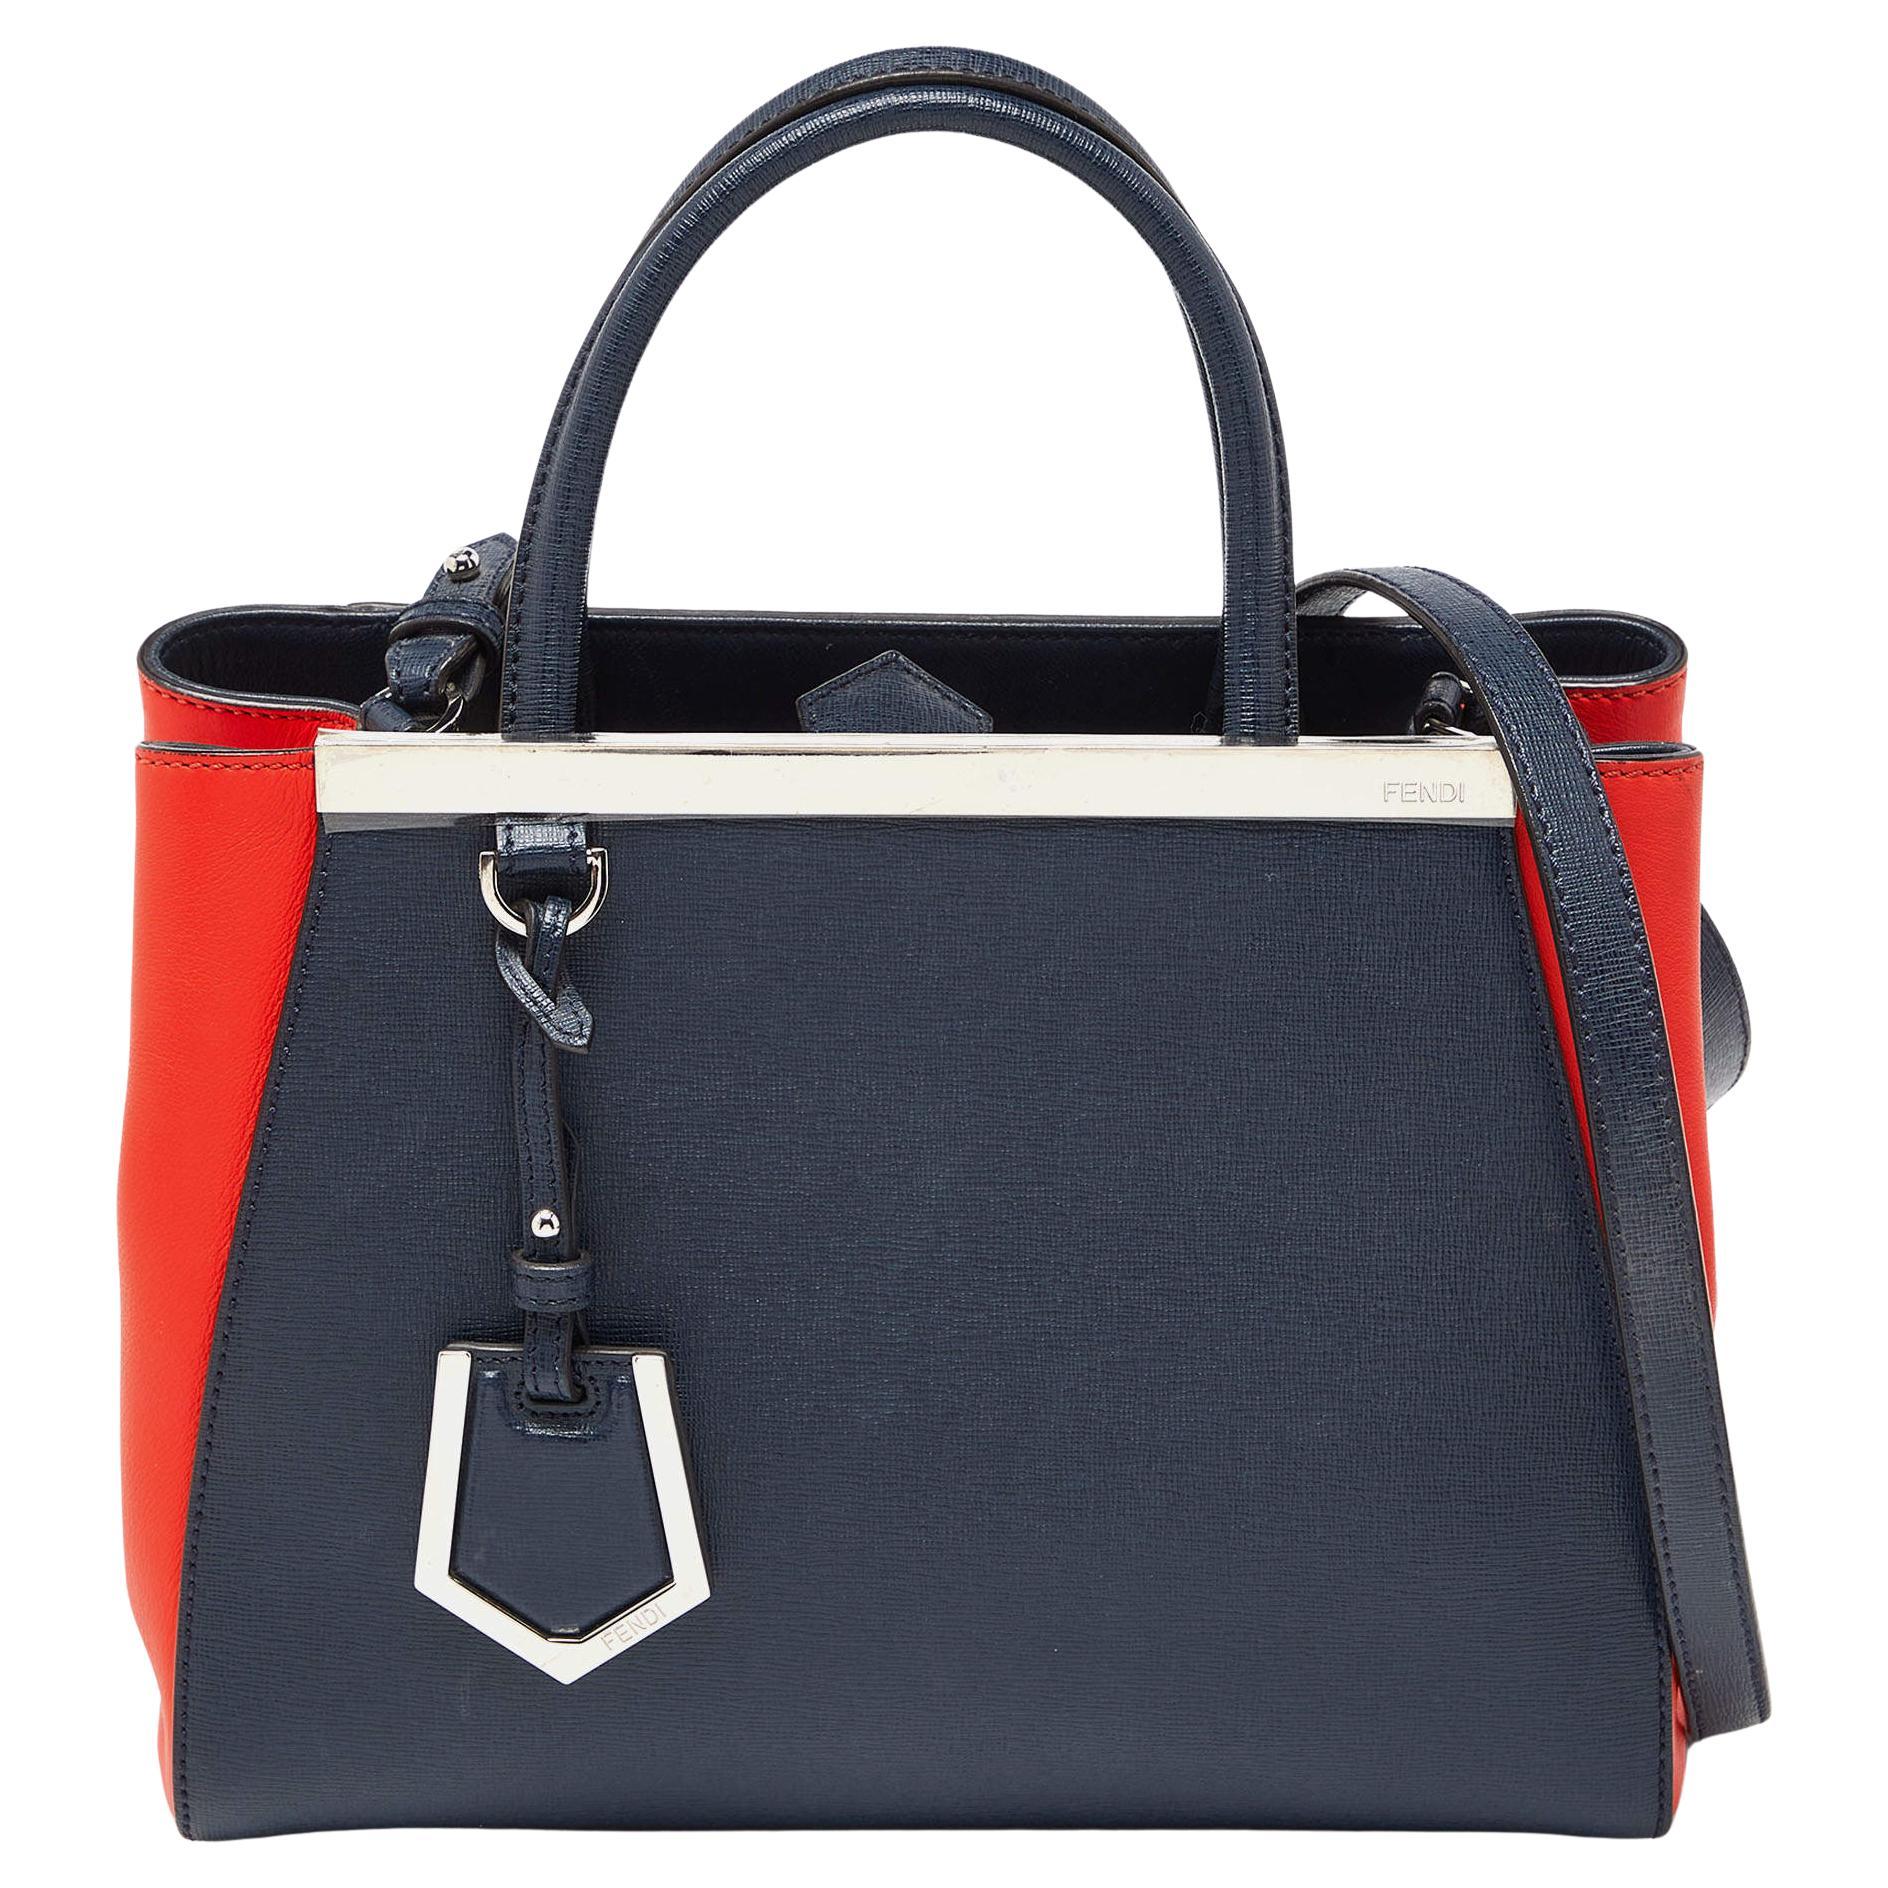 Fendi Navy Blue/Red Leather Petite Sac 2jours Tote For Sale